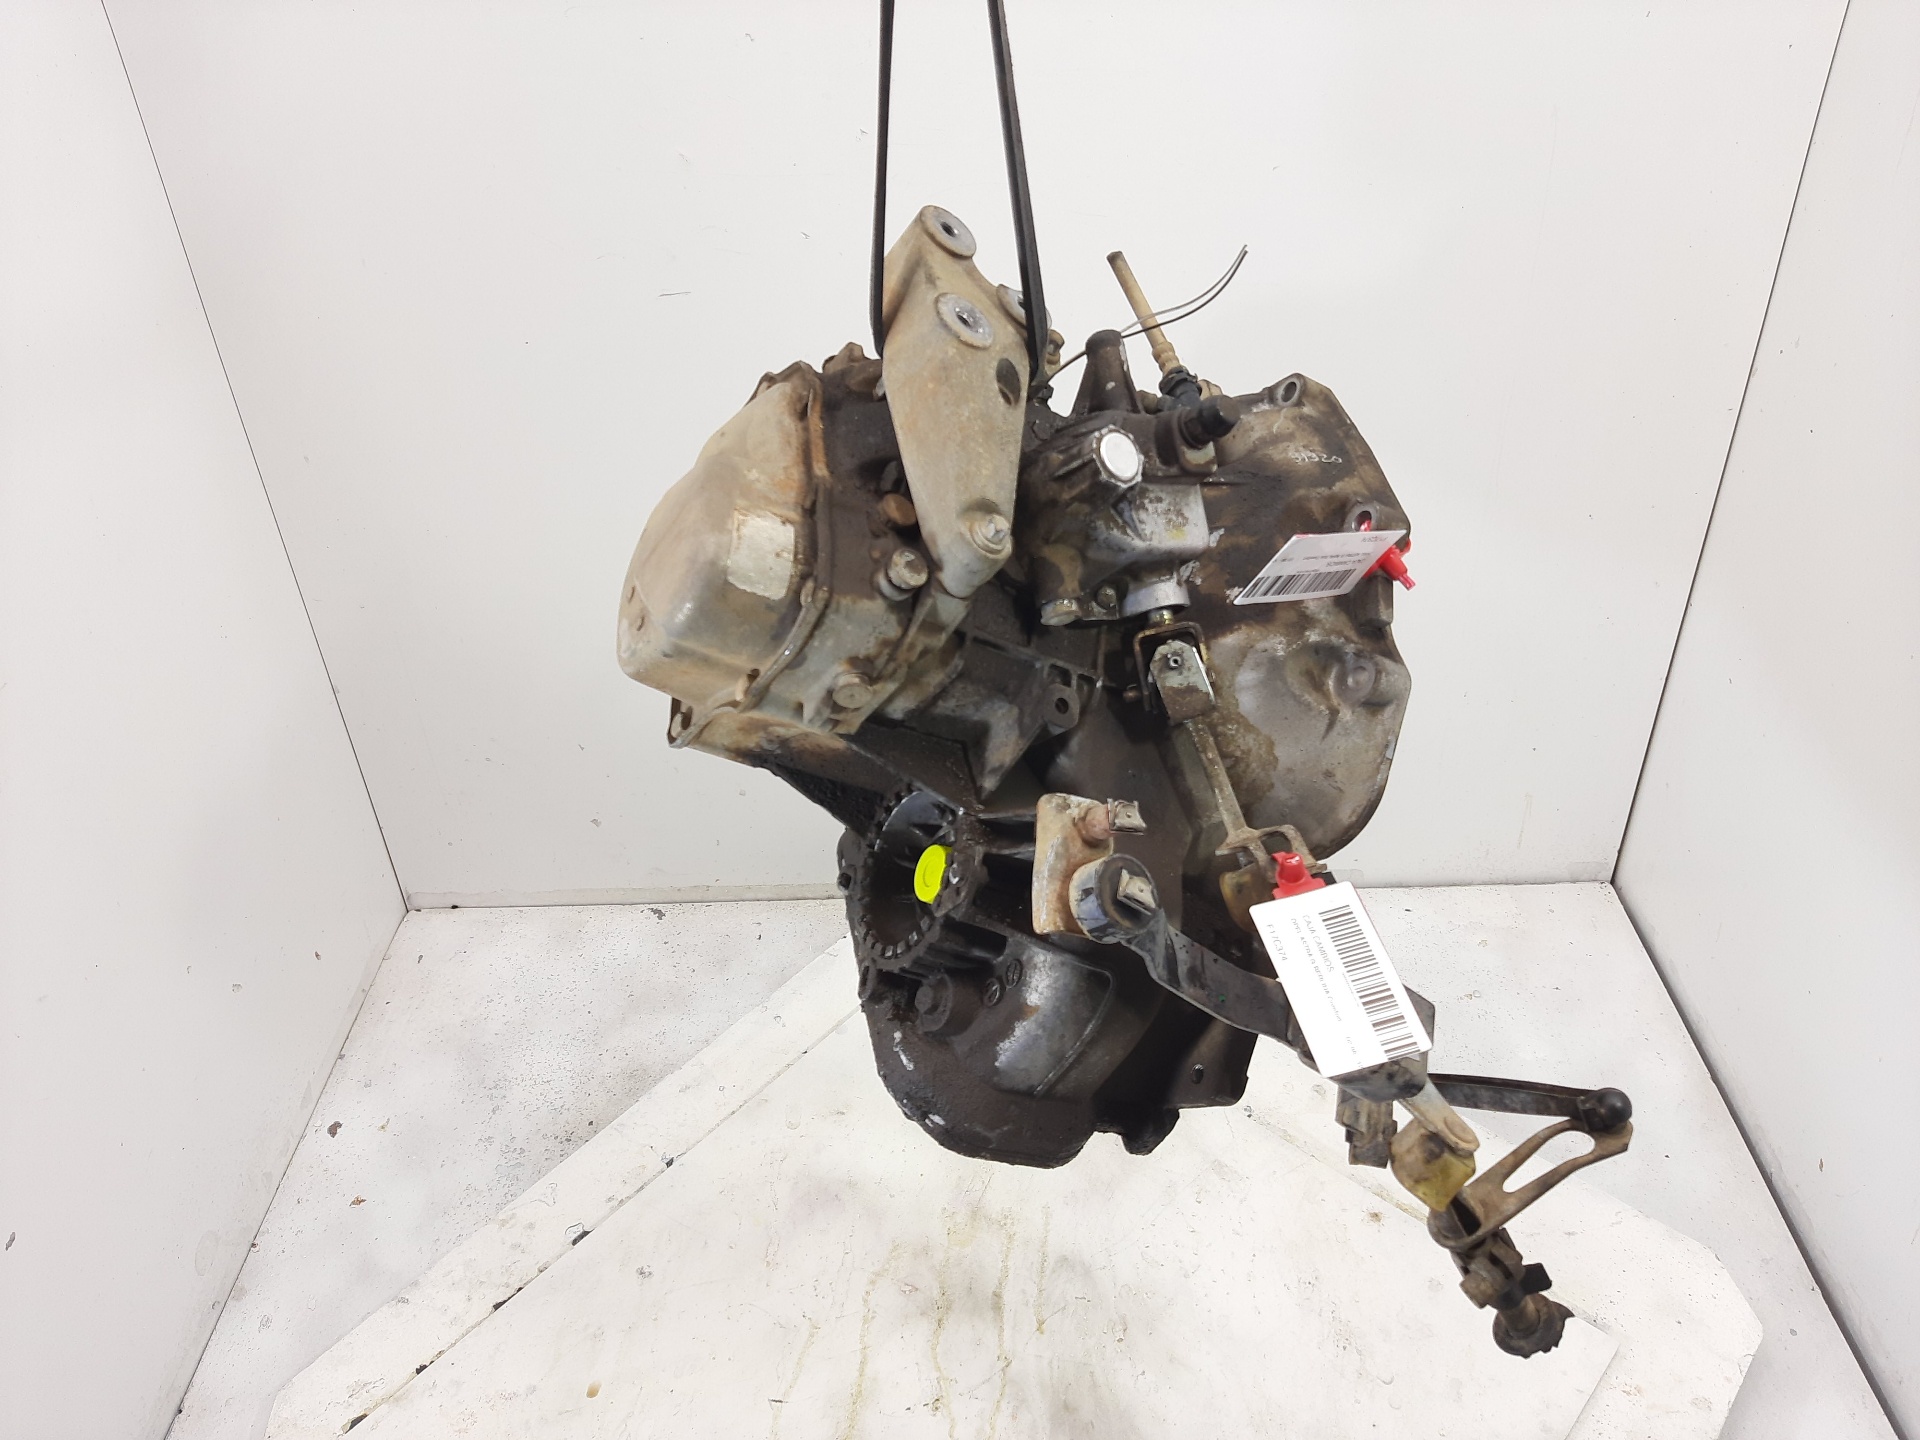 OPEL Astra H (2004-2014) Gearbox F17C374, 5VELOCIDADES 24123774